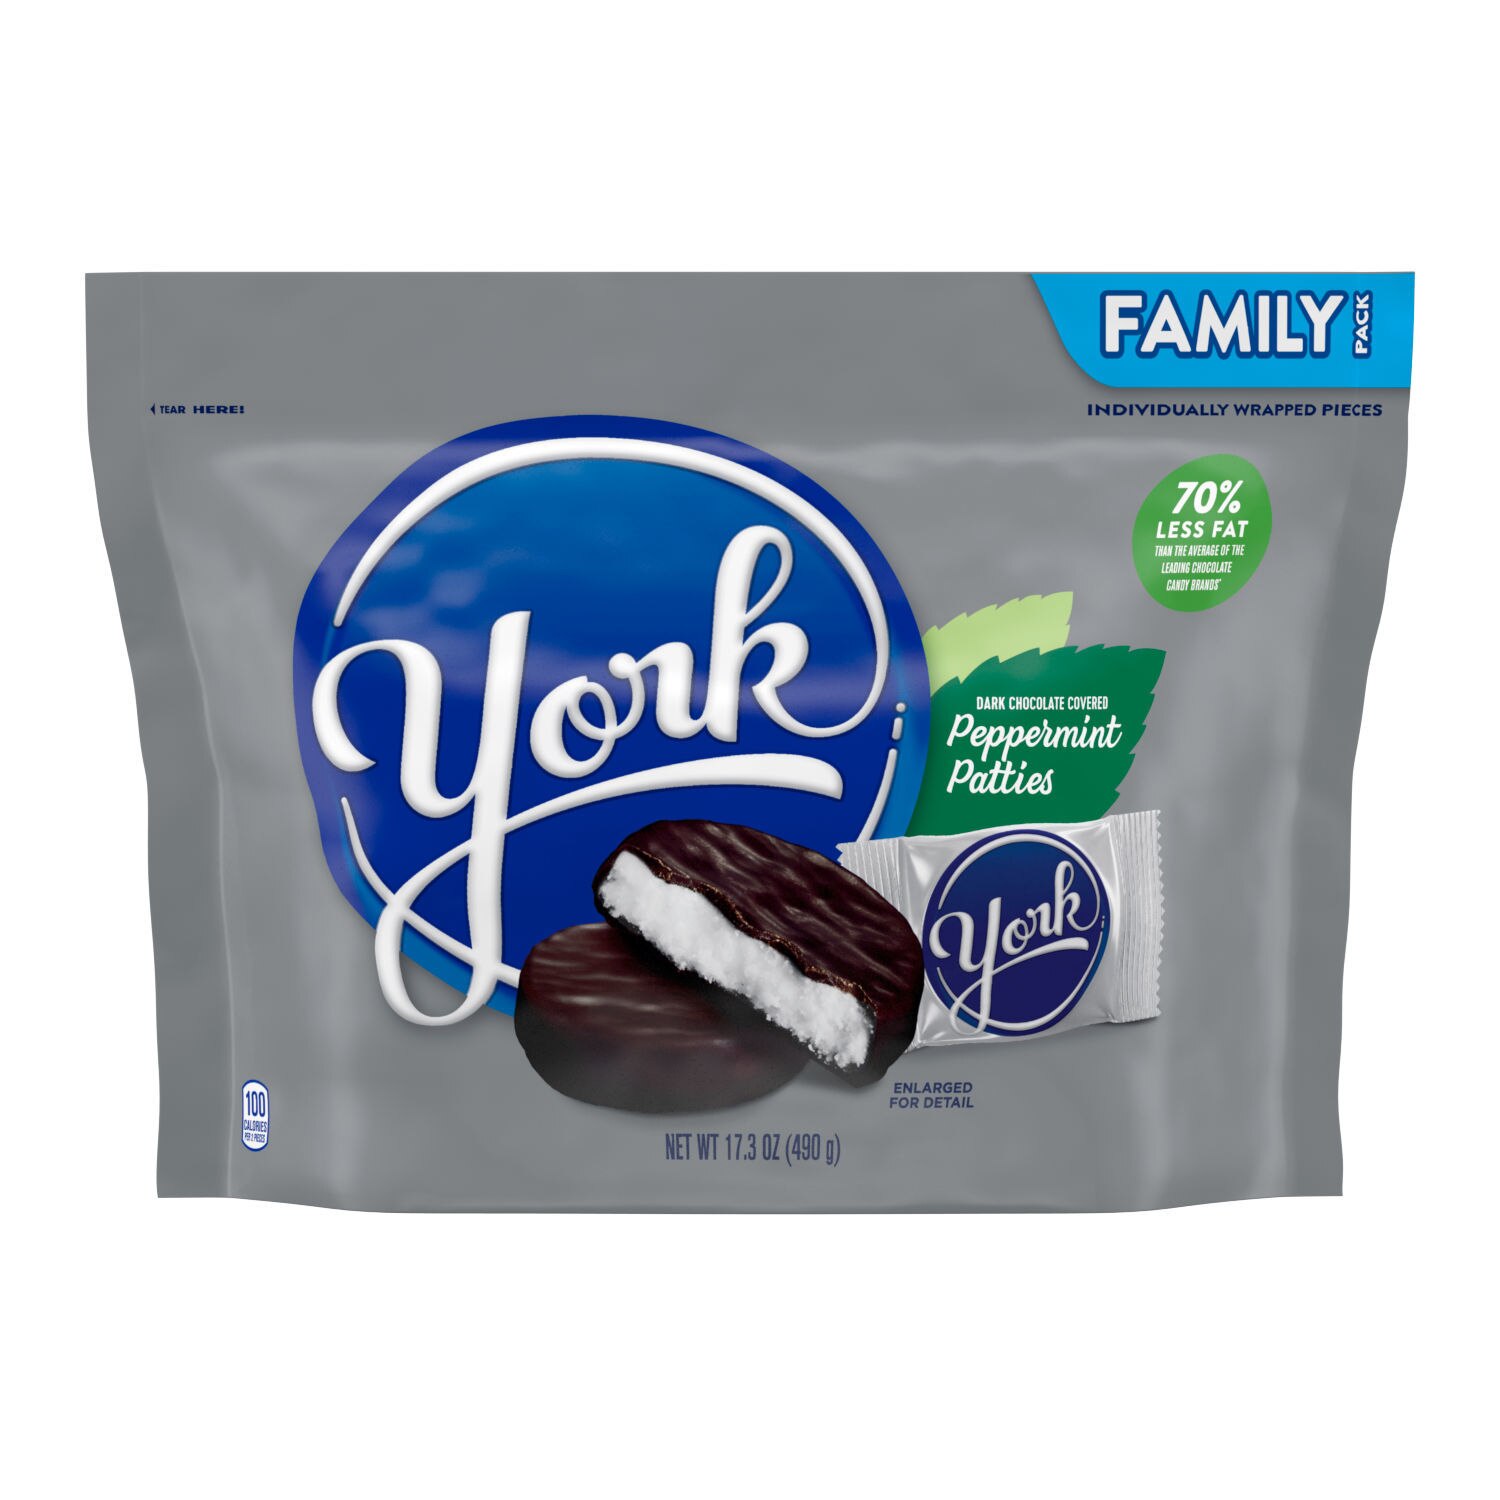 York Dark Chocolate Peppermint Patties, Candy Family Pack, 17.3 oz